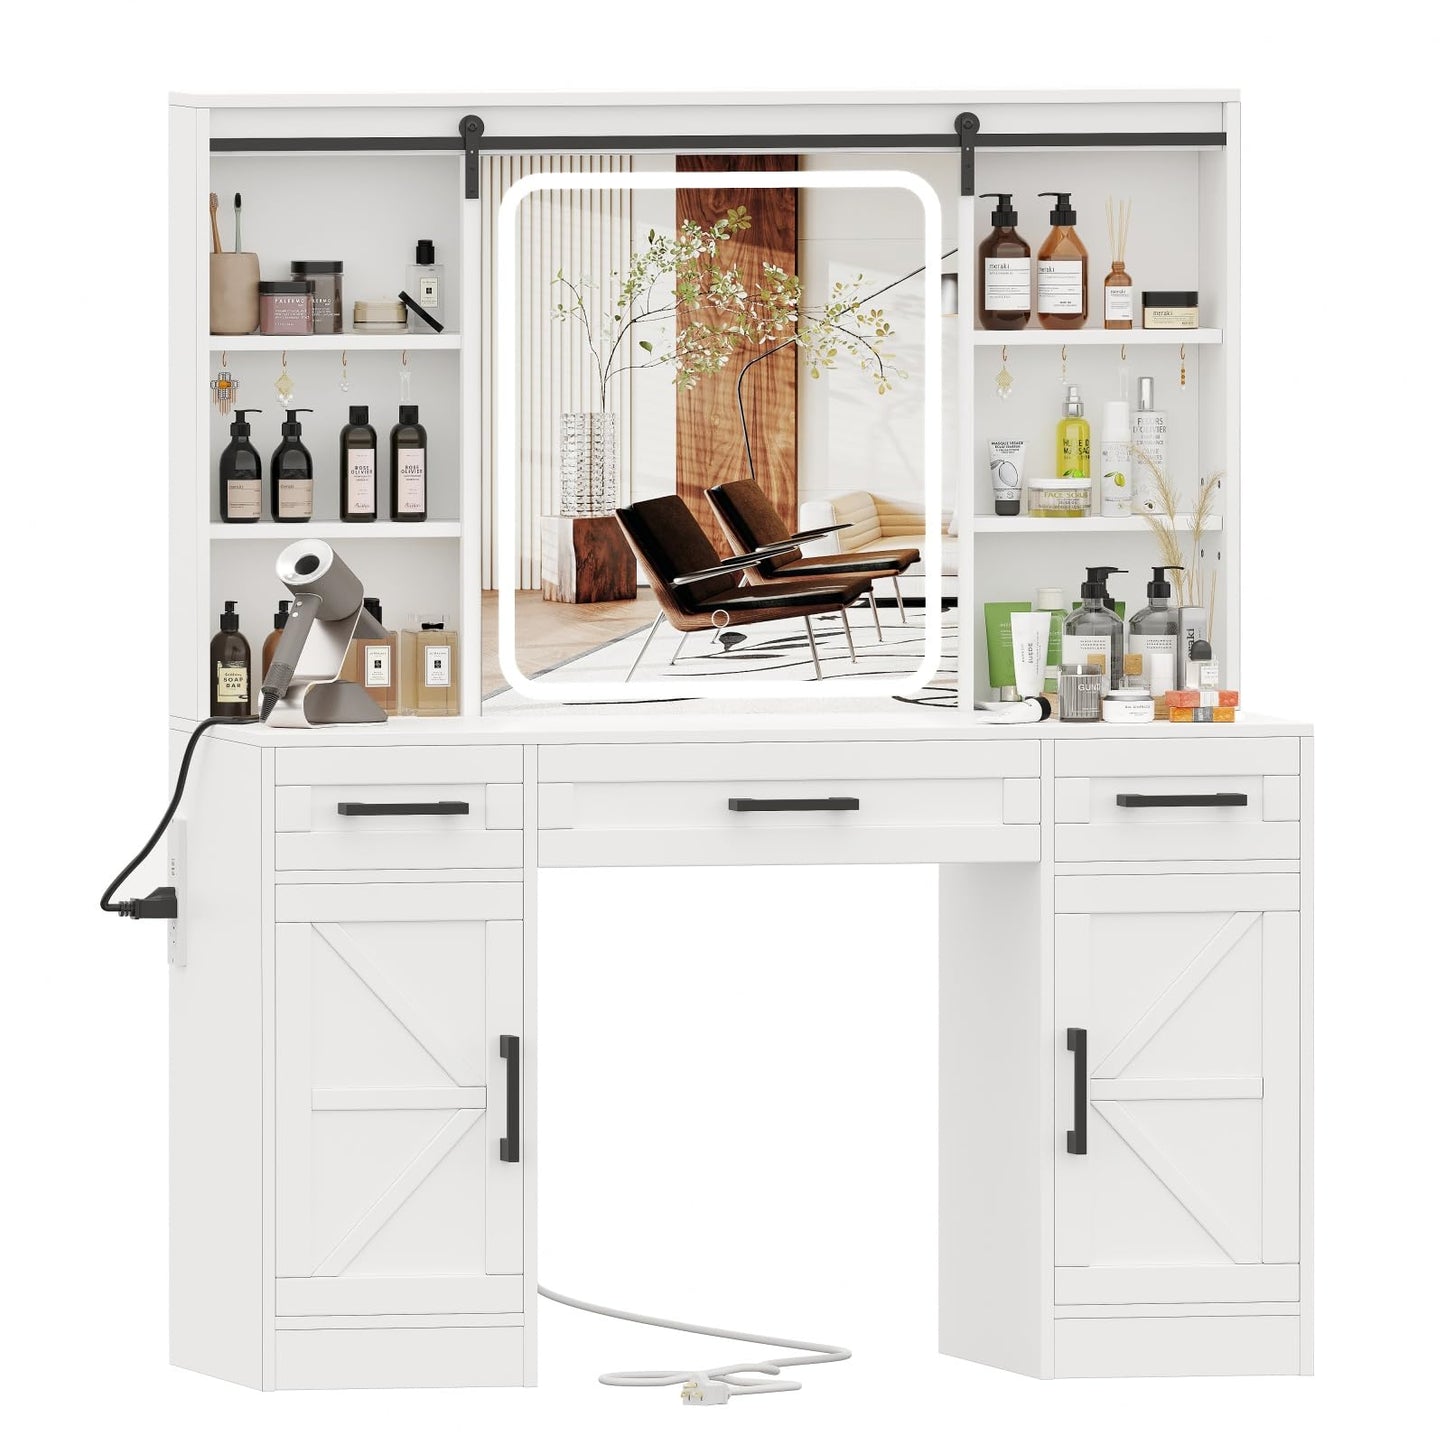 Irontar Farmhouse Makeup Vanity Desk with Sliding Mirror & Charging Station, Vanity Table with Lights & Hidden Storage Shelves, Makeup Desk with 3